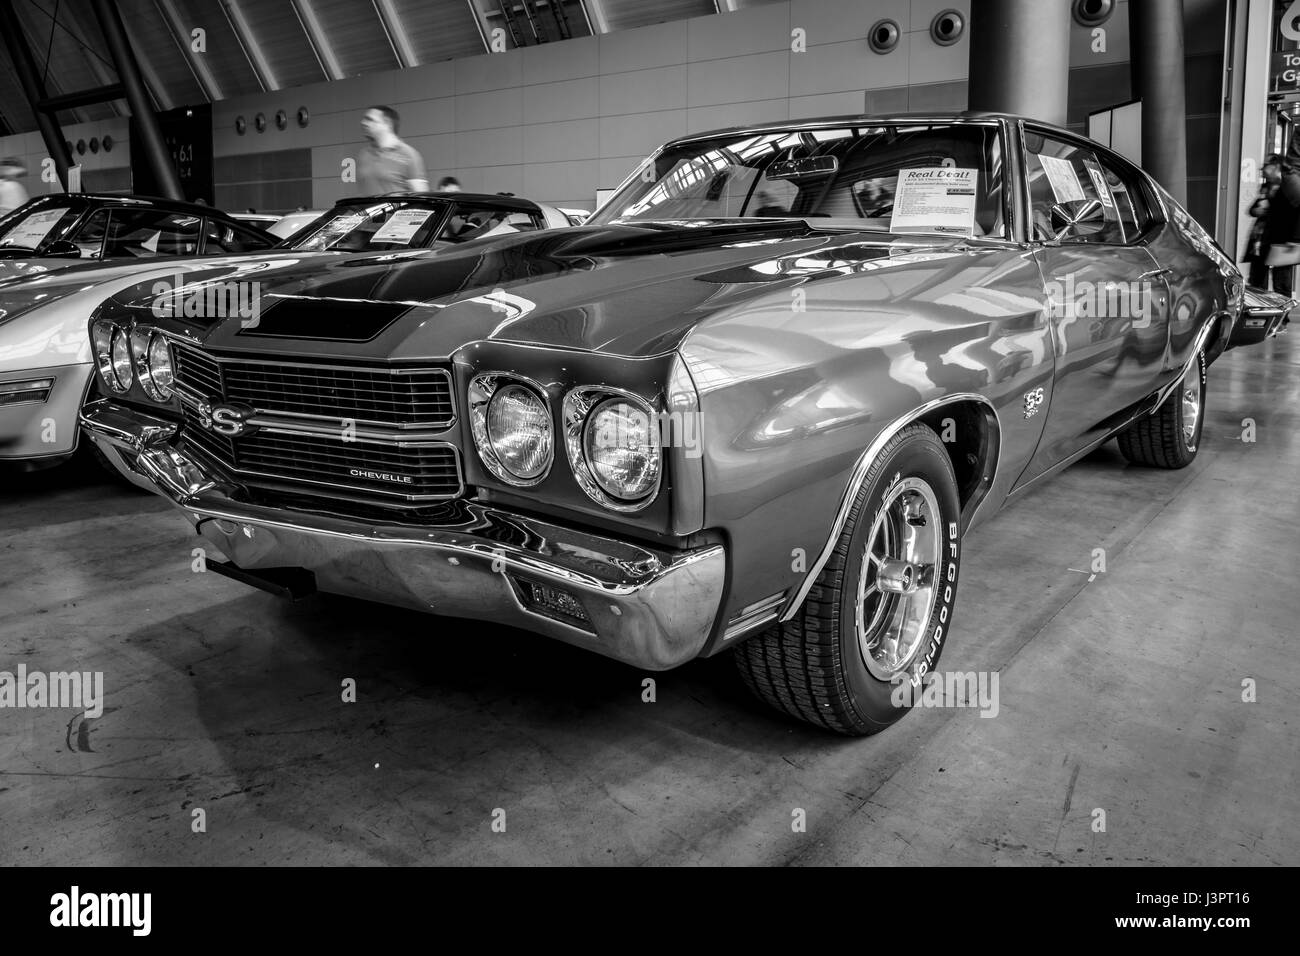 STUTTGART, GERMANY - MARCH 03, 2017: Mid-size car Chevrolet Chevelle SS, 1970. Black and white. Europe's greatest classic car exhibition 'RETRO CLASSICS' Stock Photo